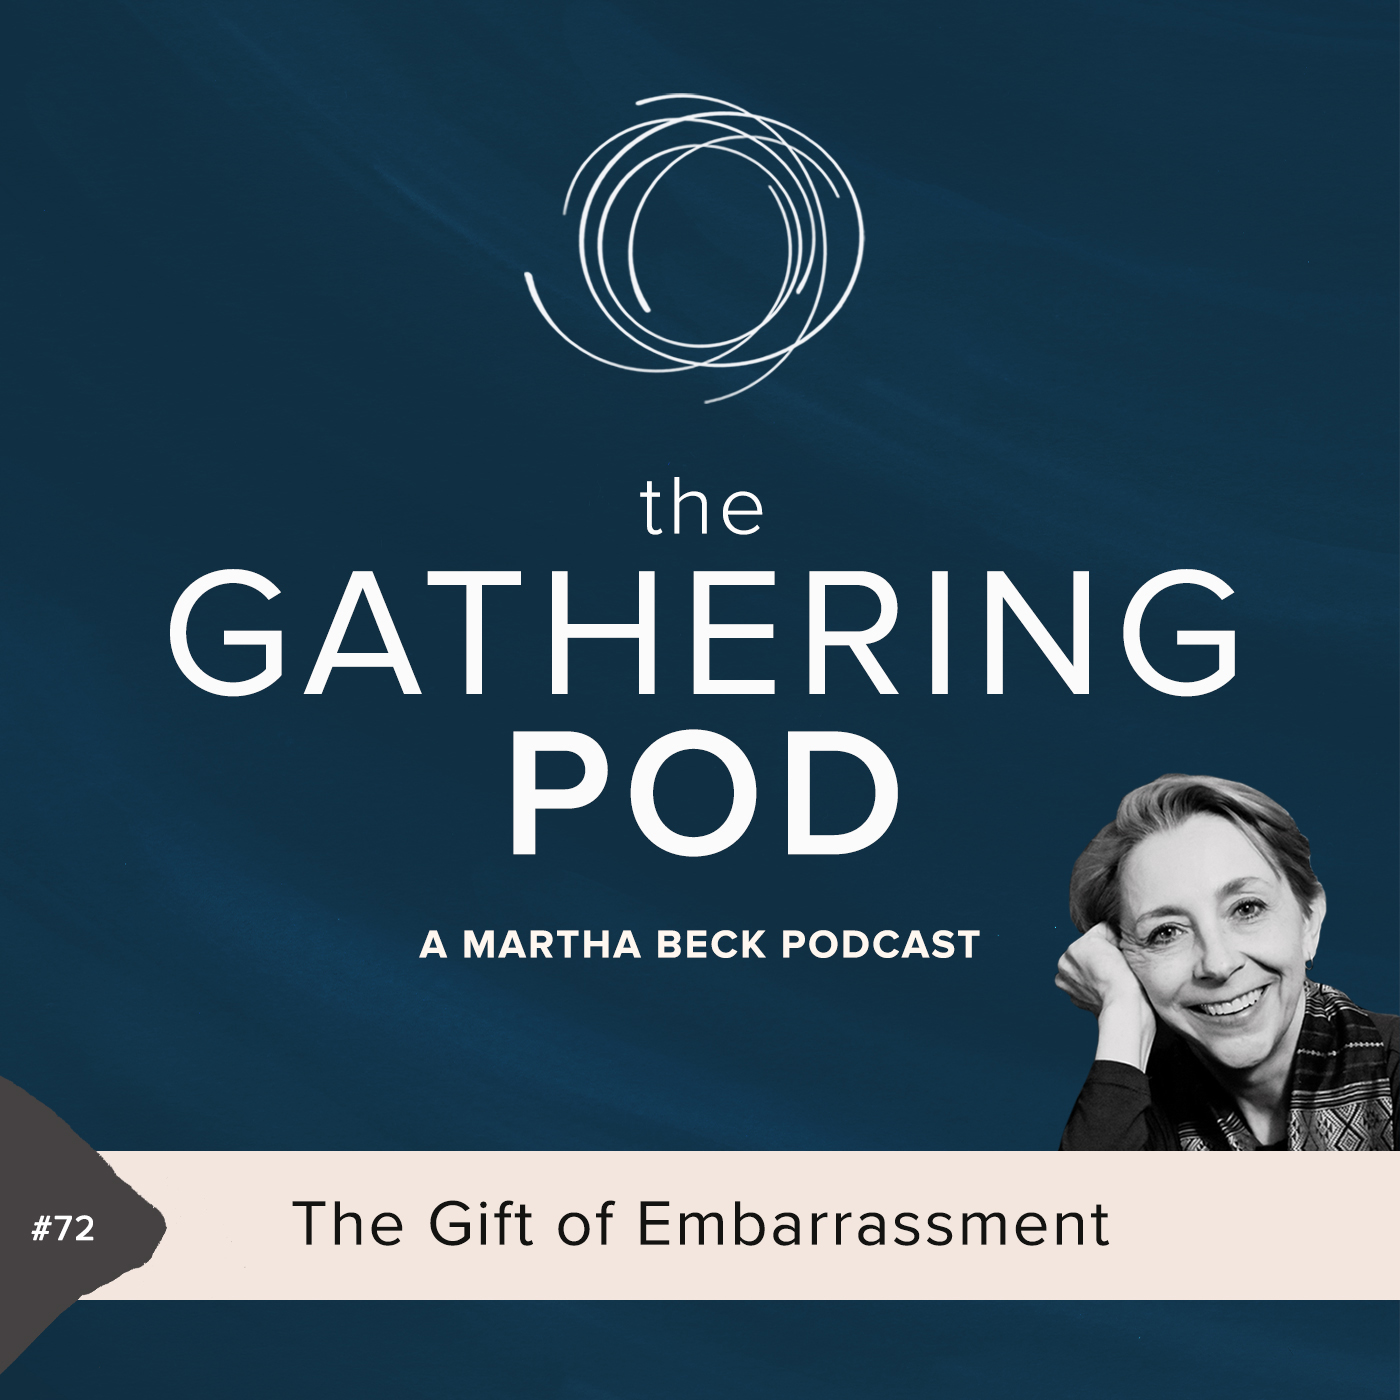 Image for The Gathering Pod A Martha Beck Podcast Episode #72 The Gift of Embarrassment